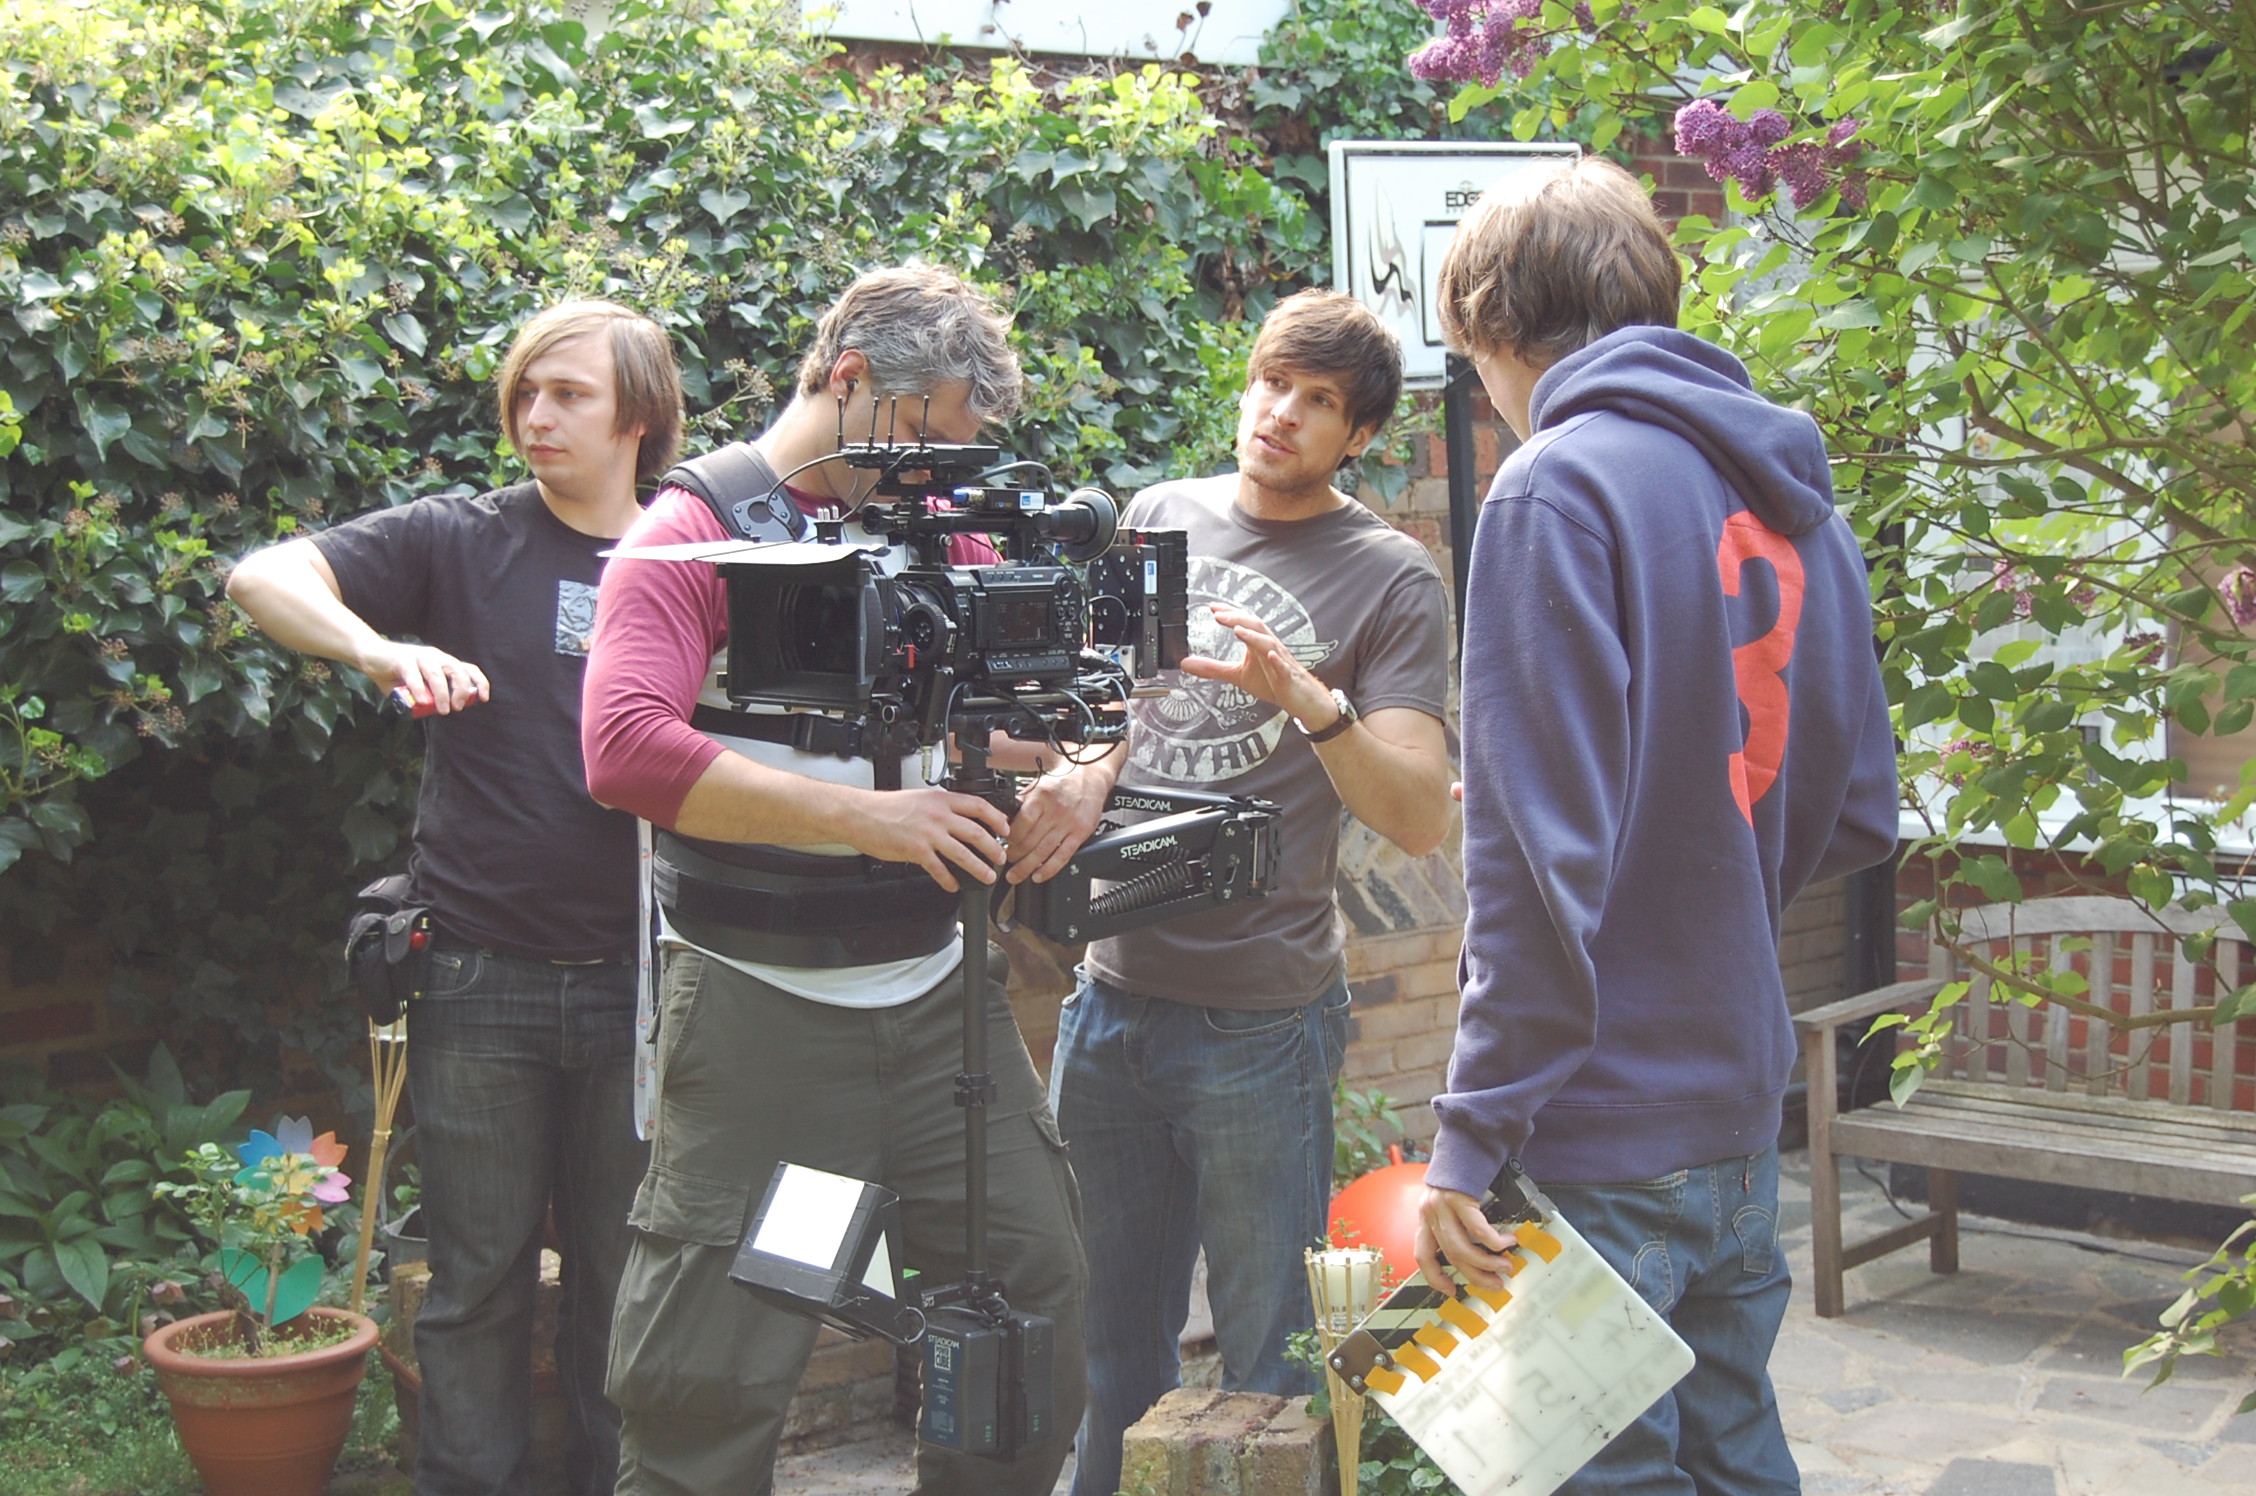 Giles Alderson directing the action in TAKEN.